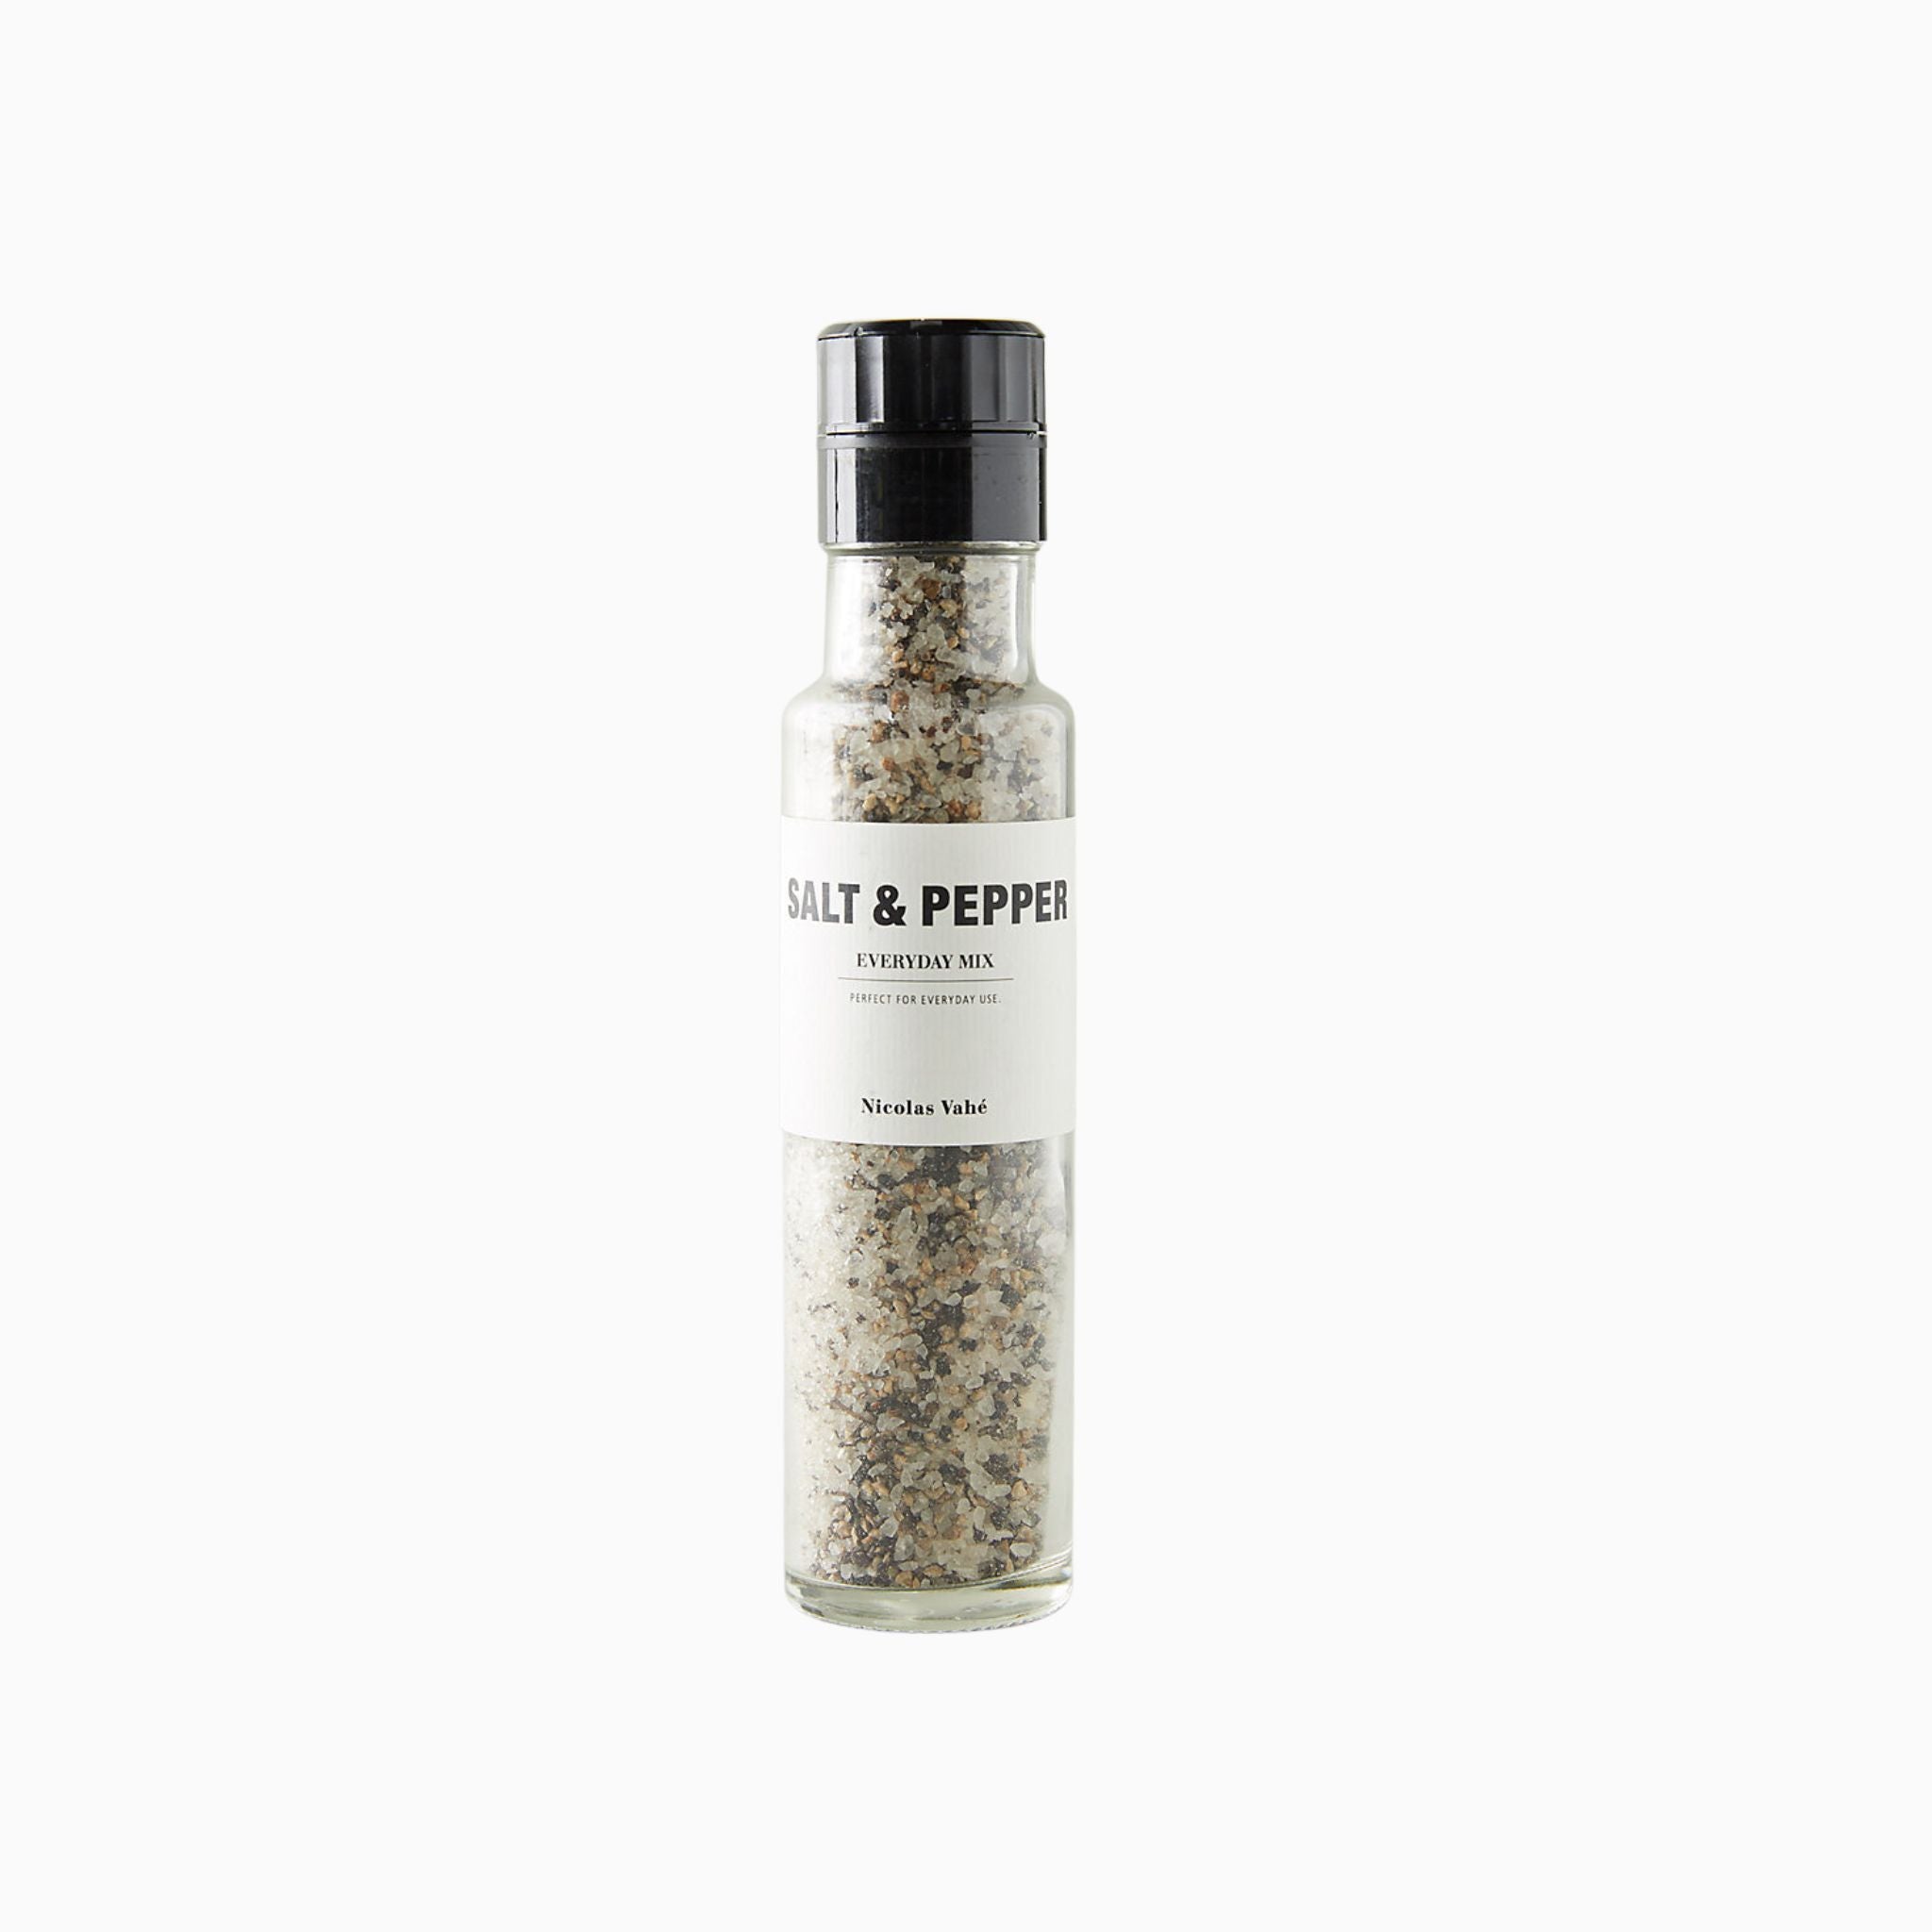 This salt and pepper mix from Nicolas Vahe is an elevated staple for every kitchen and dinner table. With a built-in grinder top for ease of use. Simply Elevated